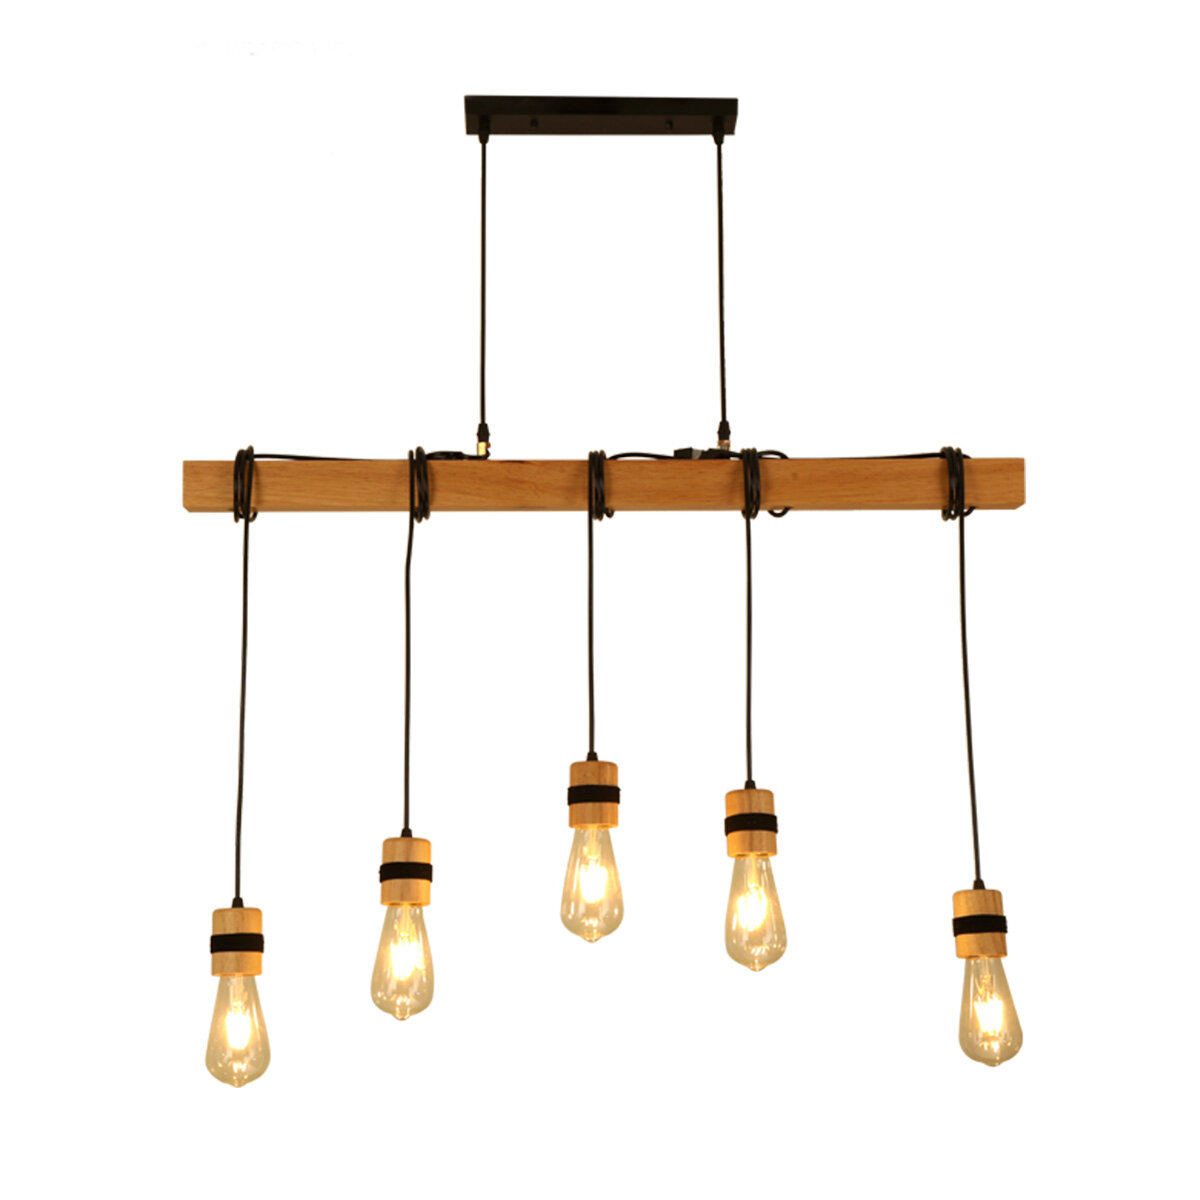 Image of AC85-265V Industrial Wooden E27 Pendant Light Ceiling Lamp Chandeliers Lighting Fixtures Without Bulb